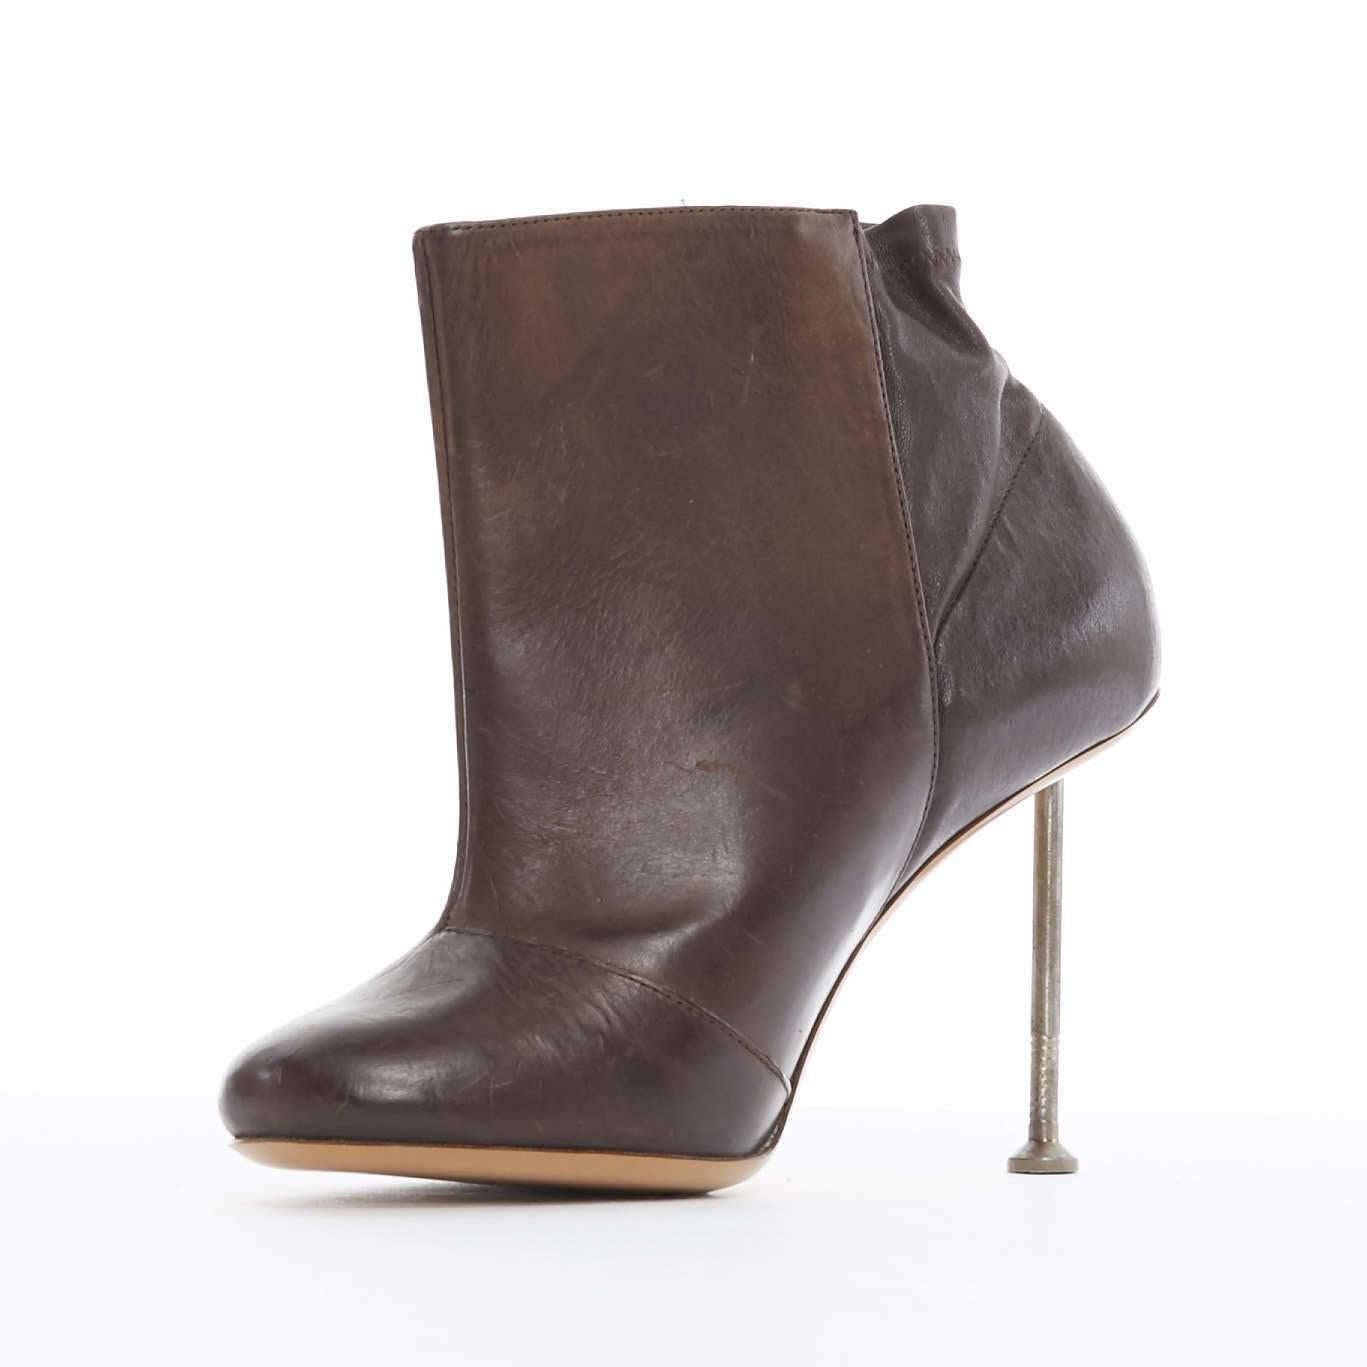 new MARTIN MARGIELA brown leather nail heel ankle boot shoe EU37 US7 at ...